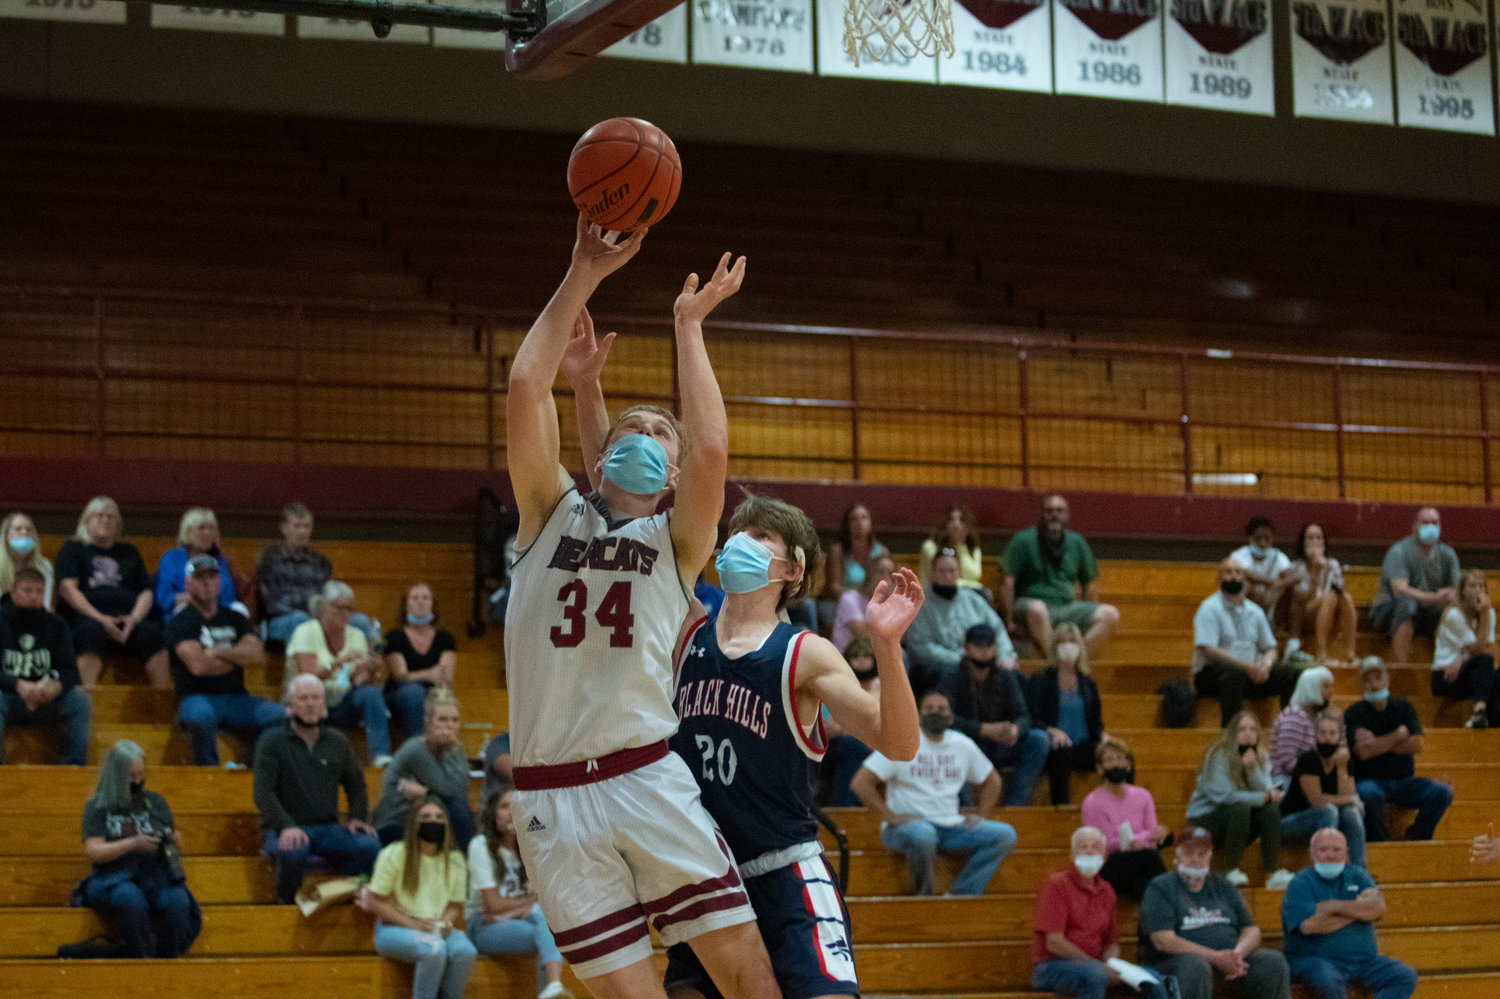 W.F. West senior Whalen Deskins goes up for two points in the first quarter against Black Hills on Friday.